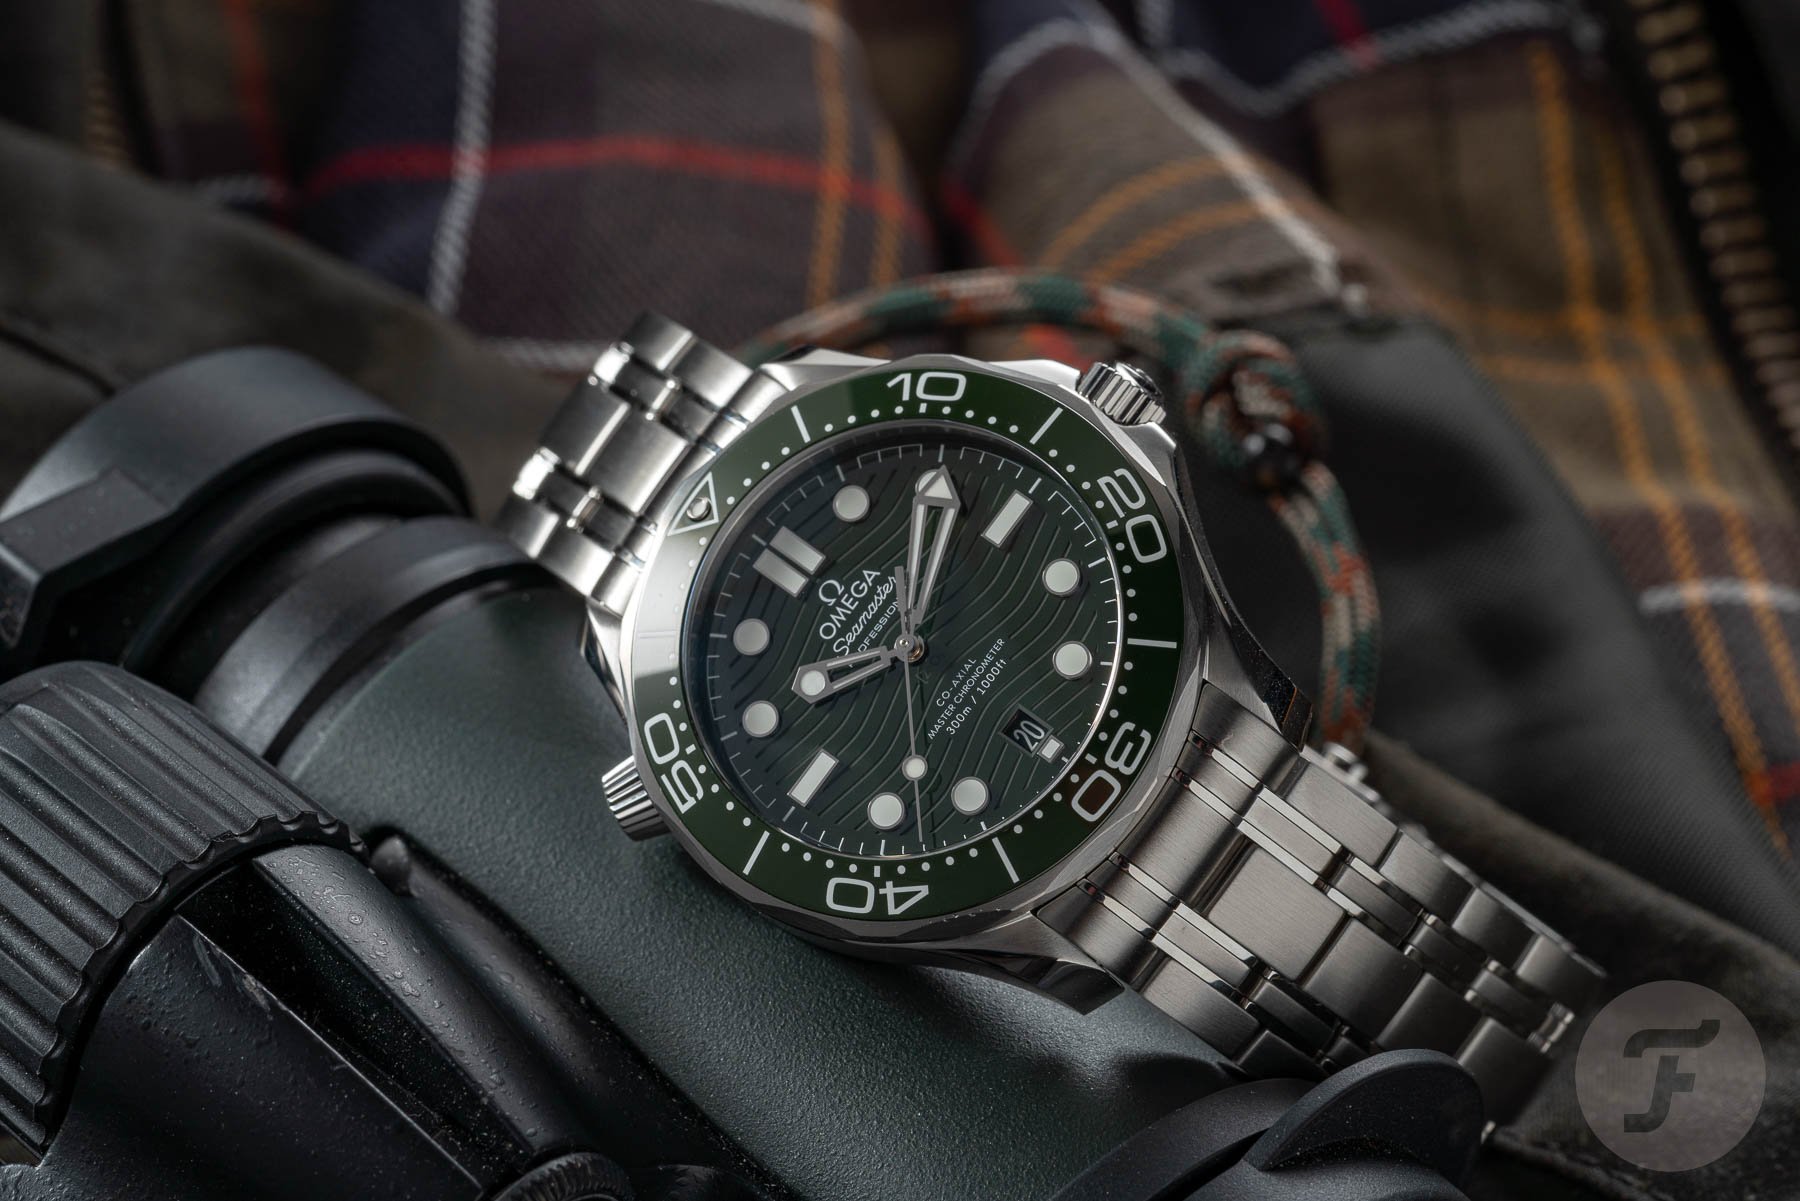 Green Omega Seamaster Diver 300m Professional Video Review